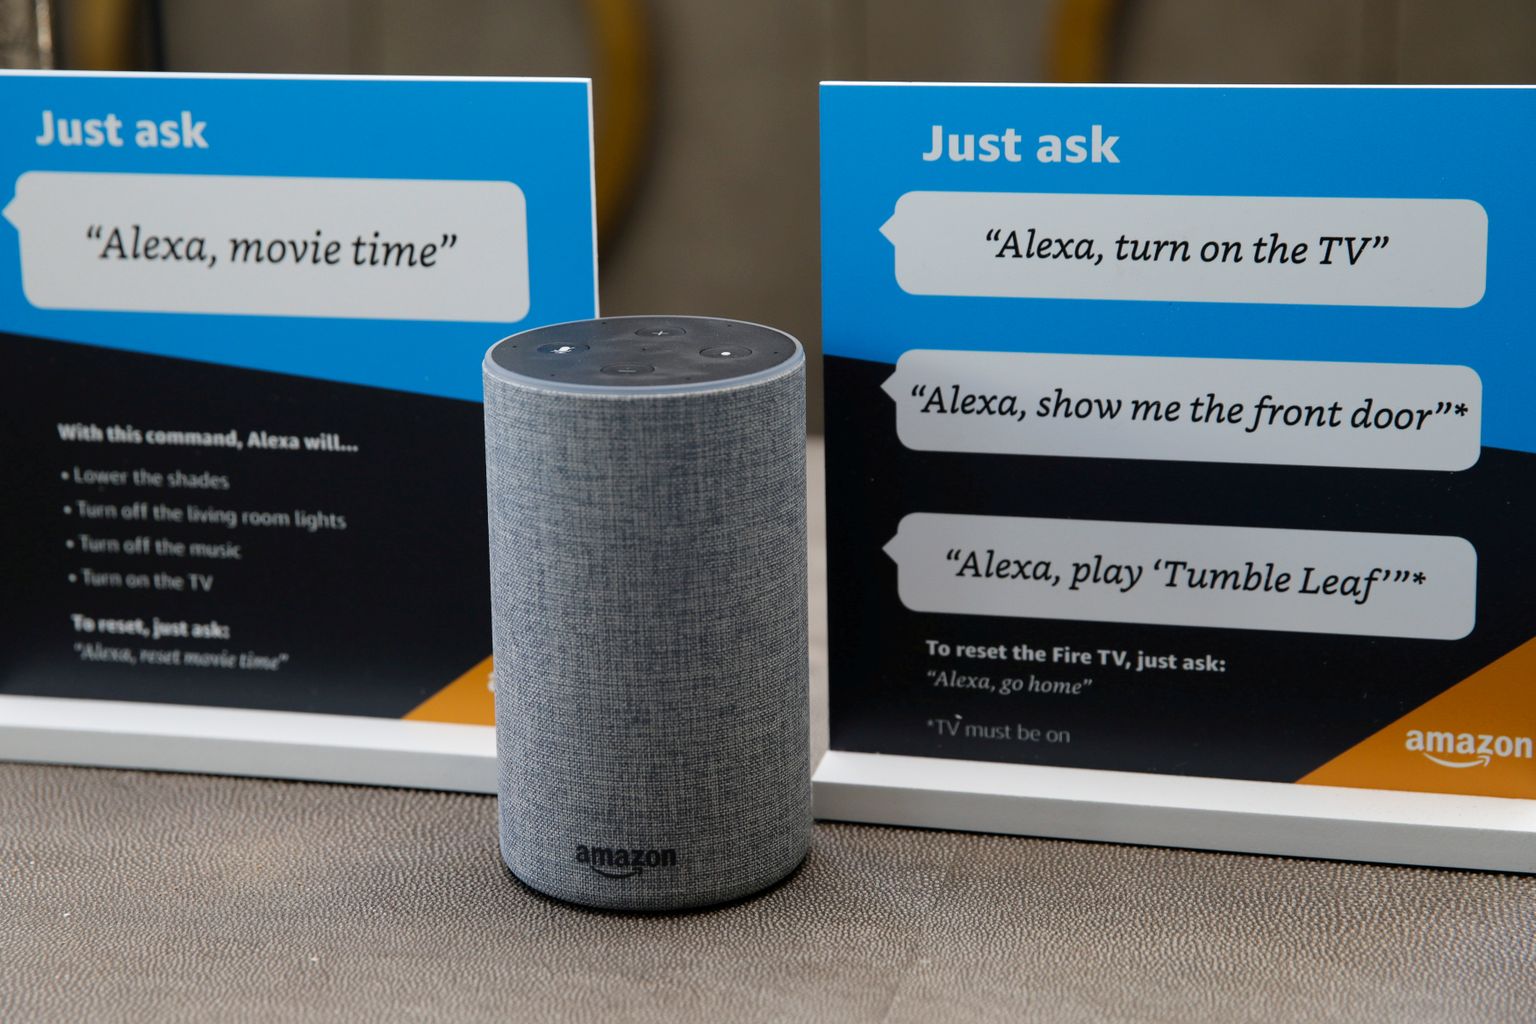 FILE PHOTO: Prompts on how to use Amazon's Alexa personal assistant are seen in an Amazon ‘experience centre’ in Vallejo, California, U.S., May 8, 2018. REUTERS/Elijah Nouvelage/File Photo